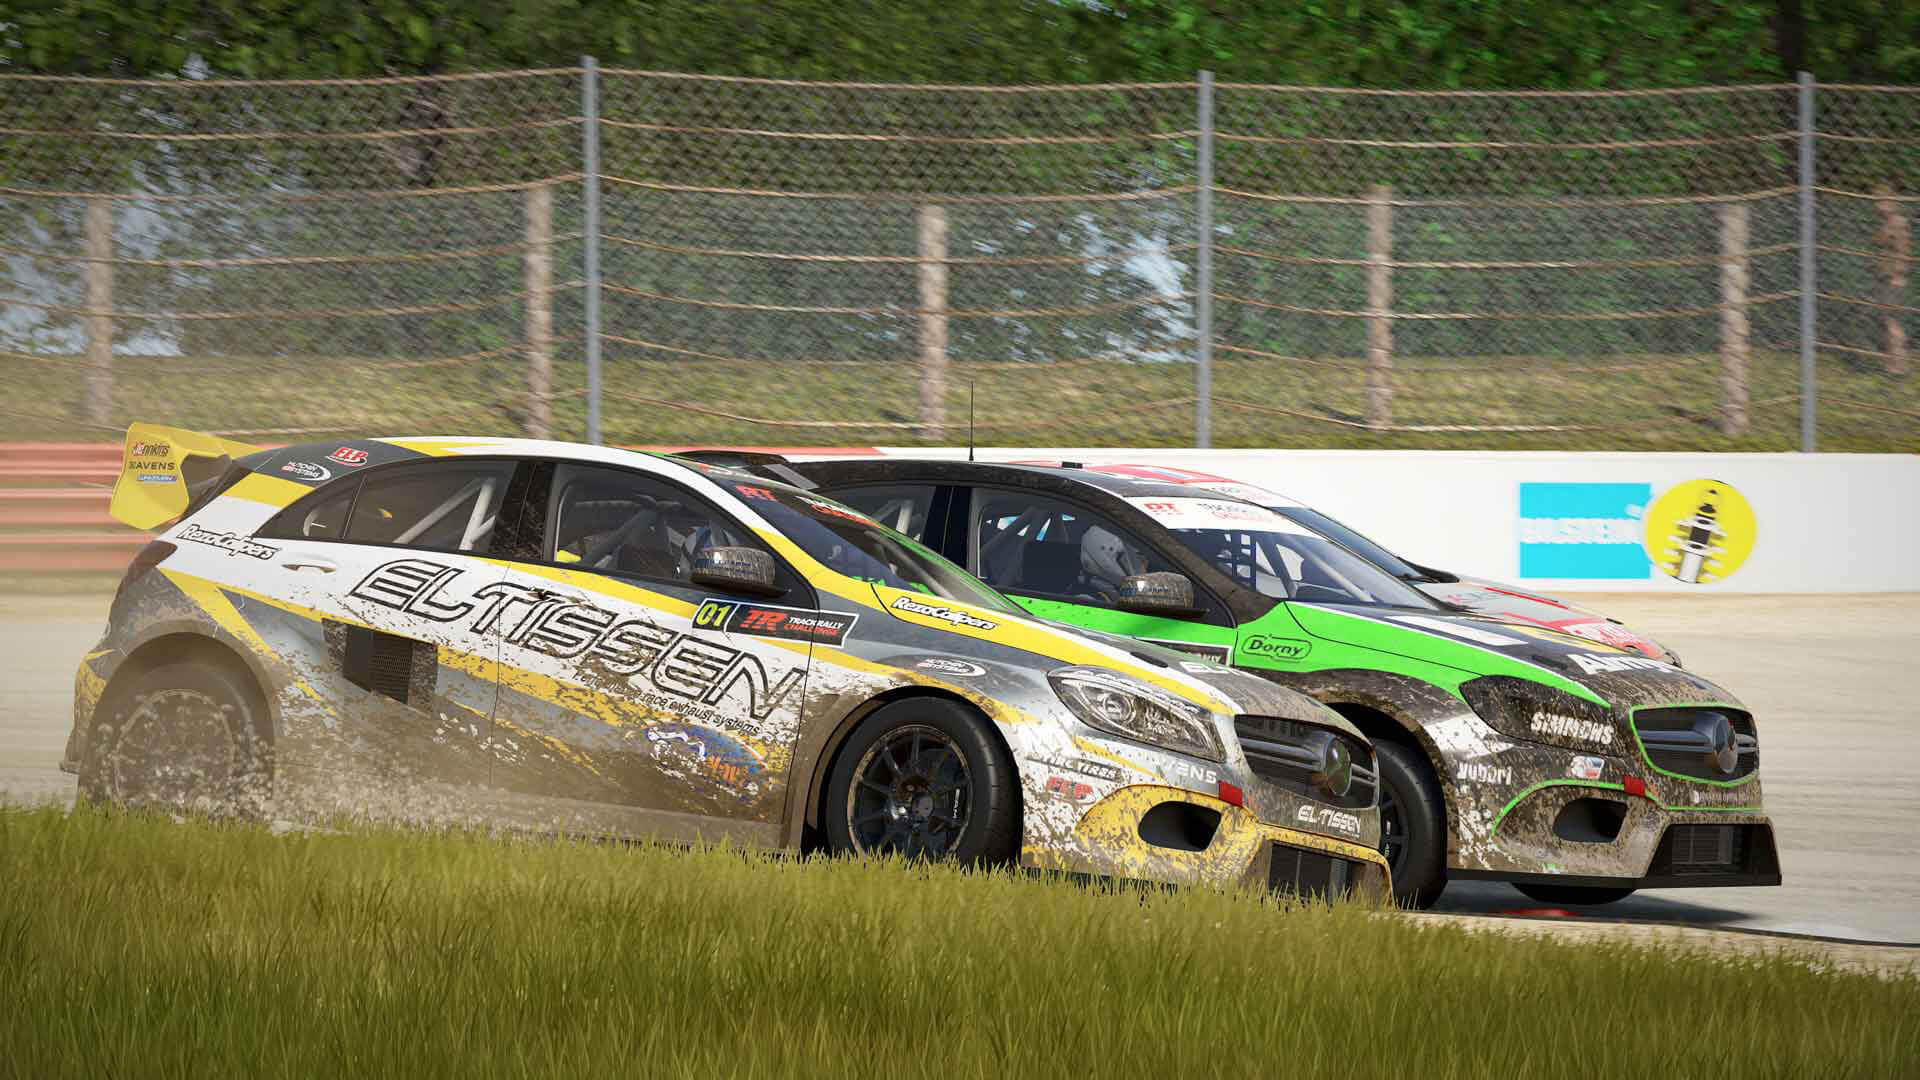 Two cars covered in mud and jostling for position in Project Cars 2